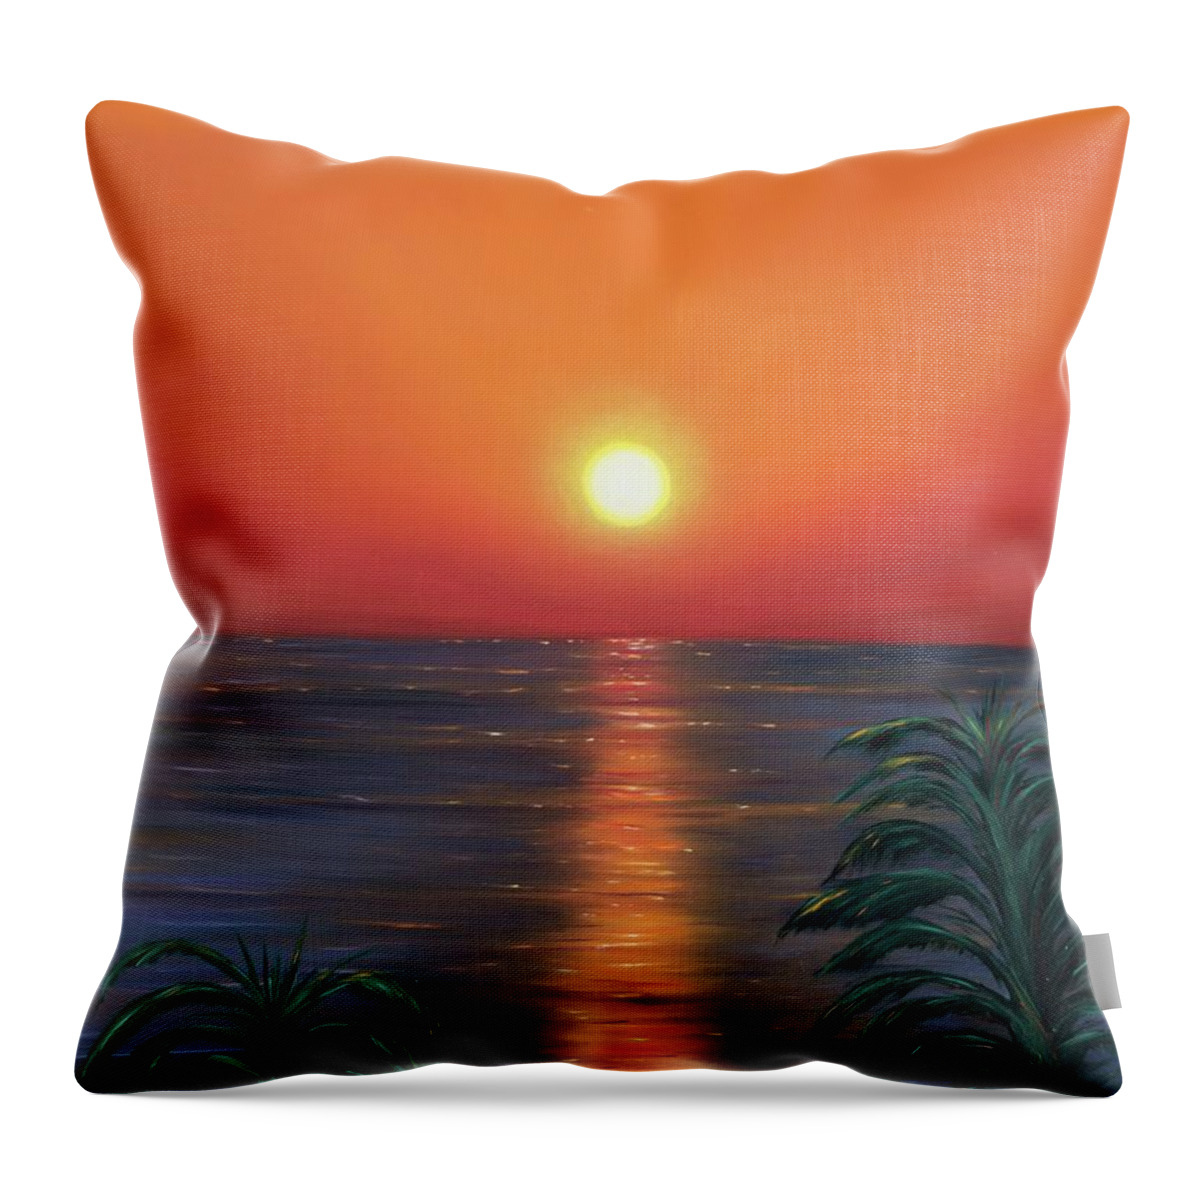 Mediterranean Throw Pillow featuring the painting Mediterranean Sunrise by Neslihan Ergul Colley